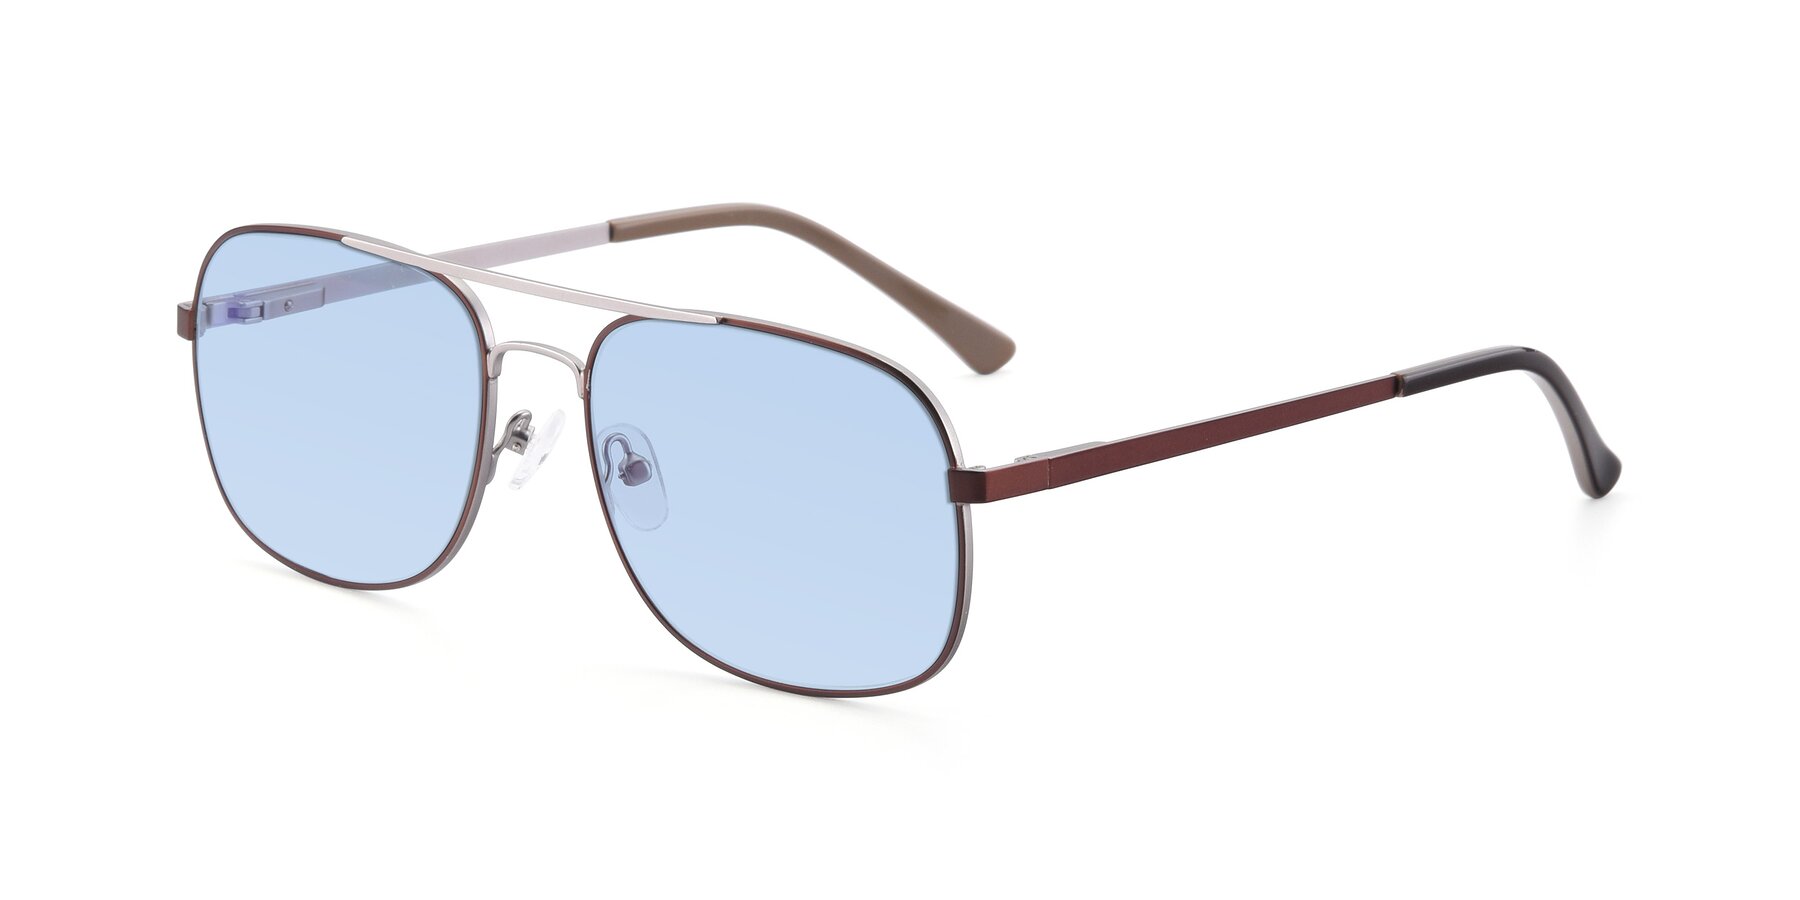 Angle of 9487 in Brown-Silver with Light Blue Tinted Lenses